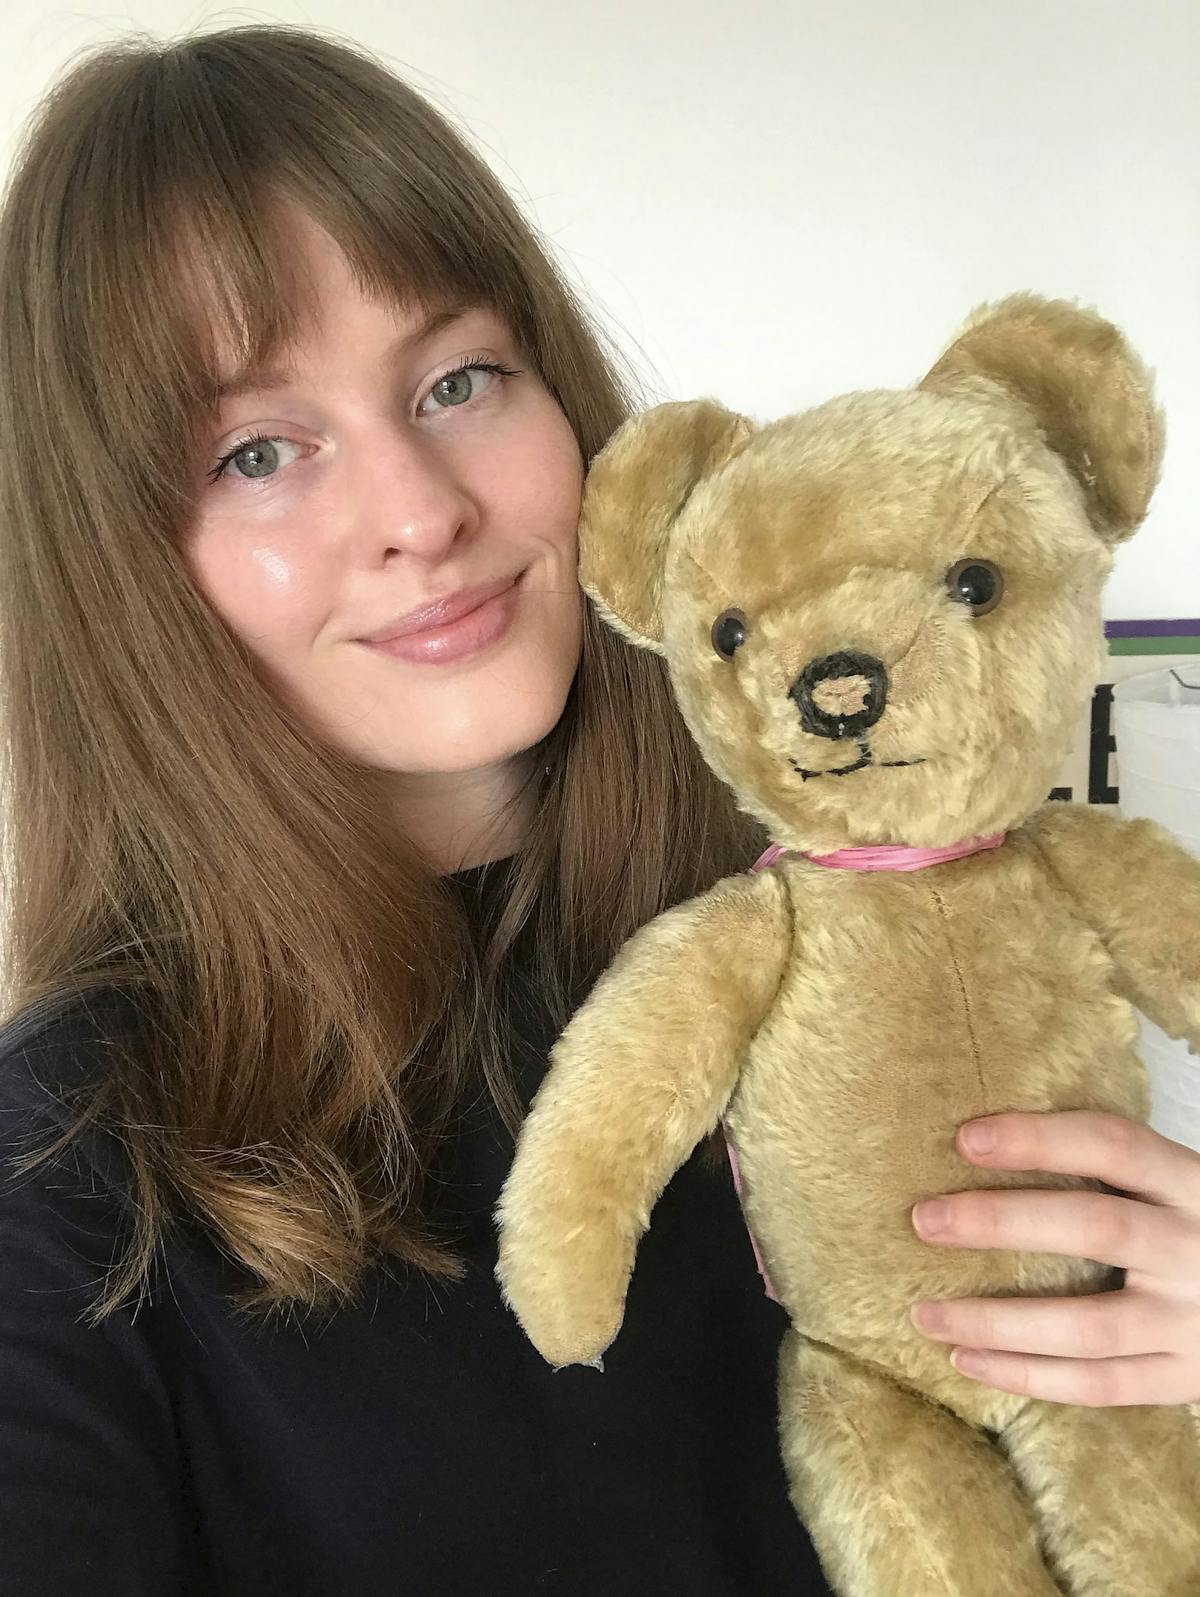 Junk reccomend teddy bear having with teenage